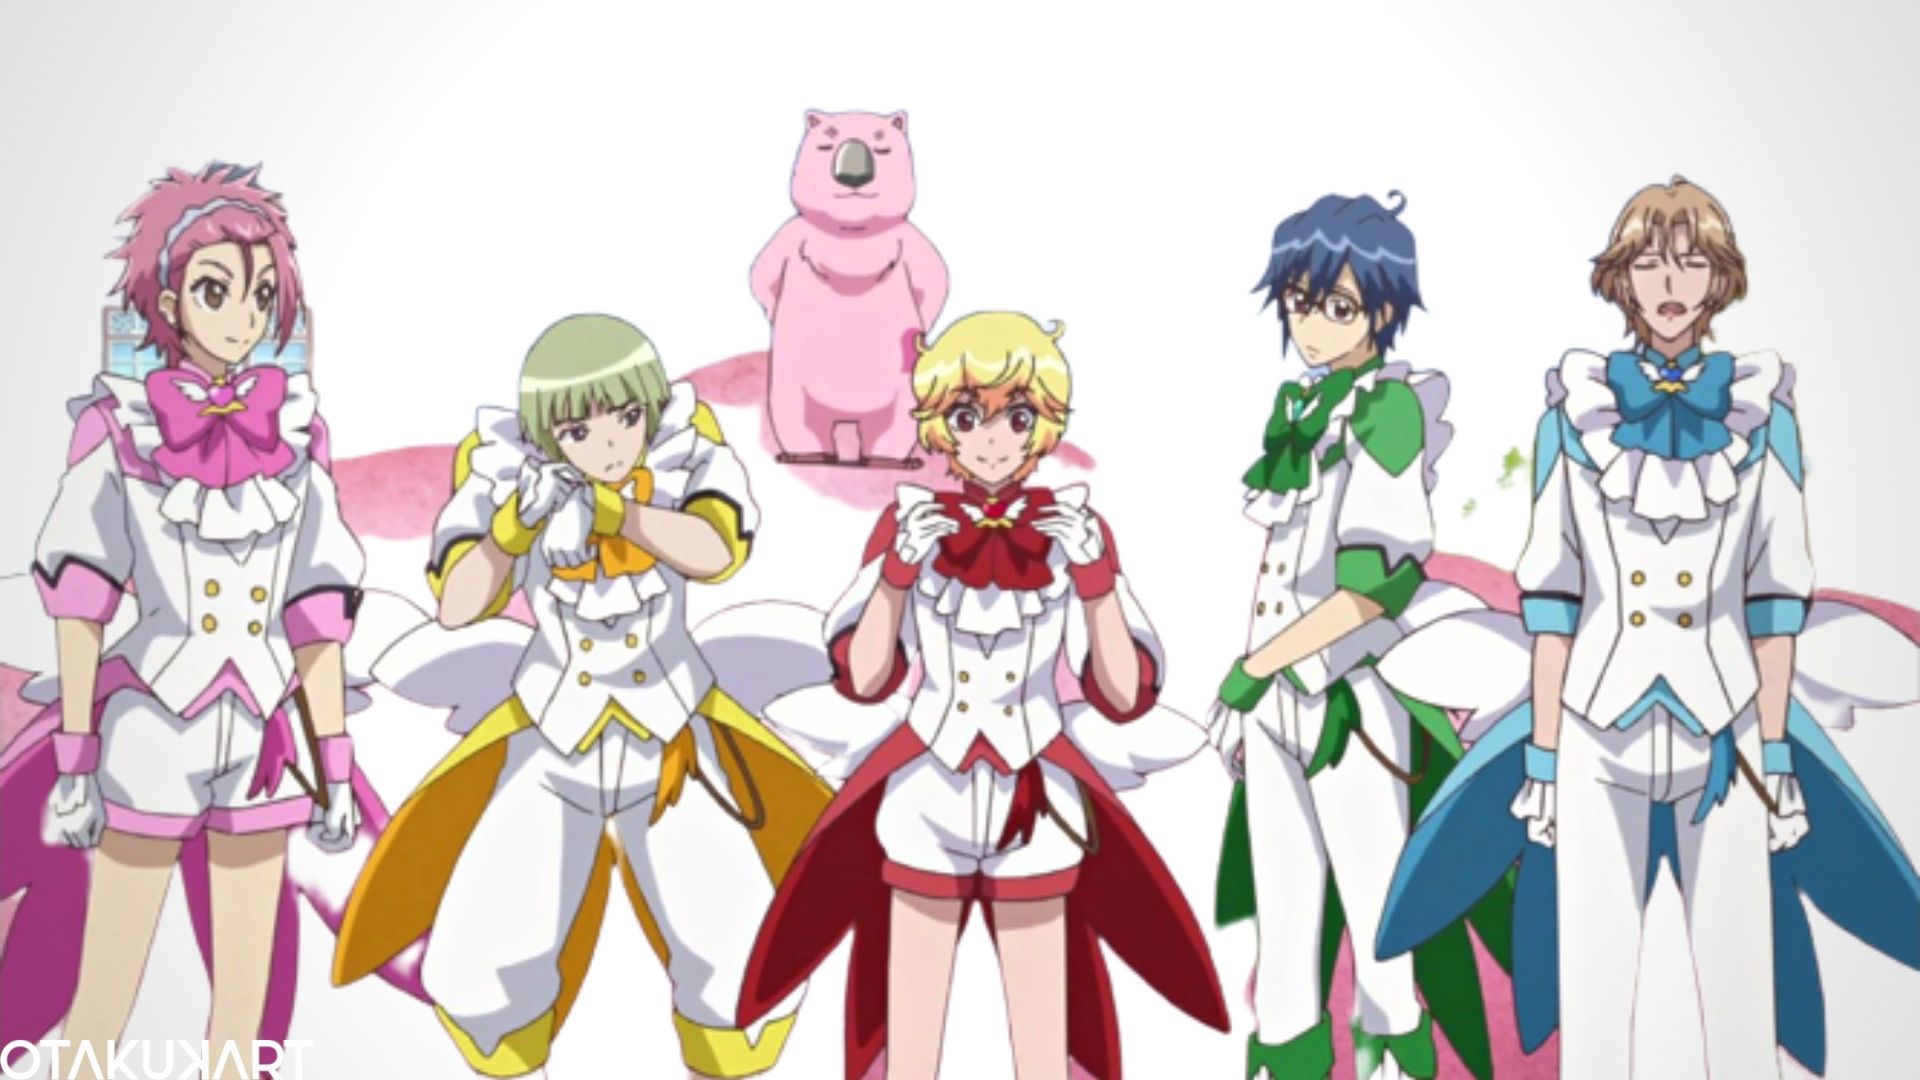 10 Most Similar Anime To Tokyo Mew Mew That You Should Check Out - OtakuKart